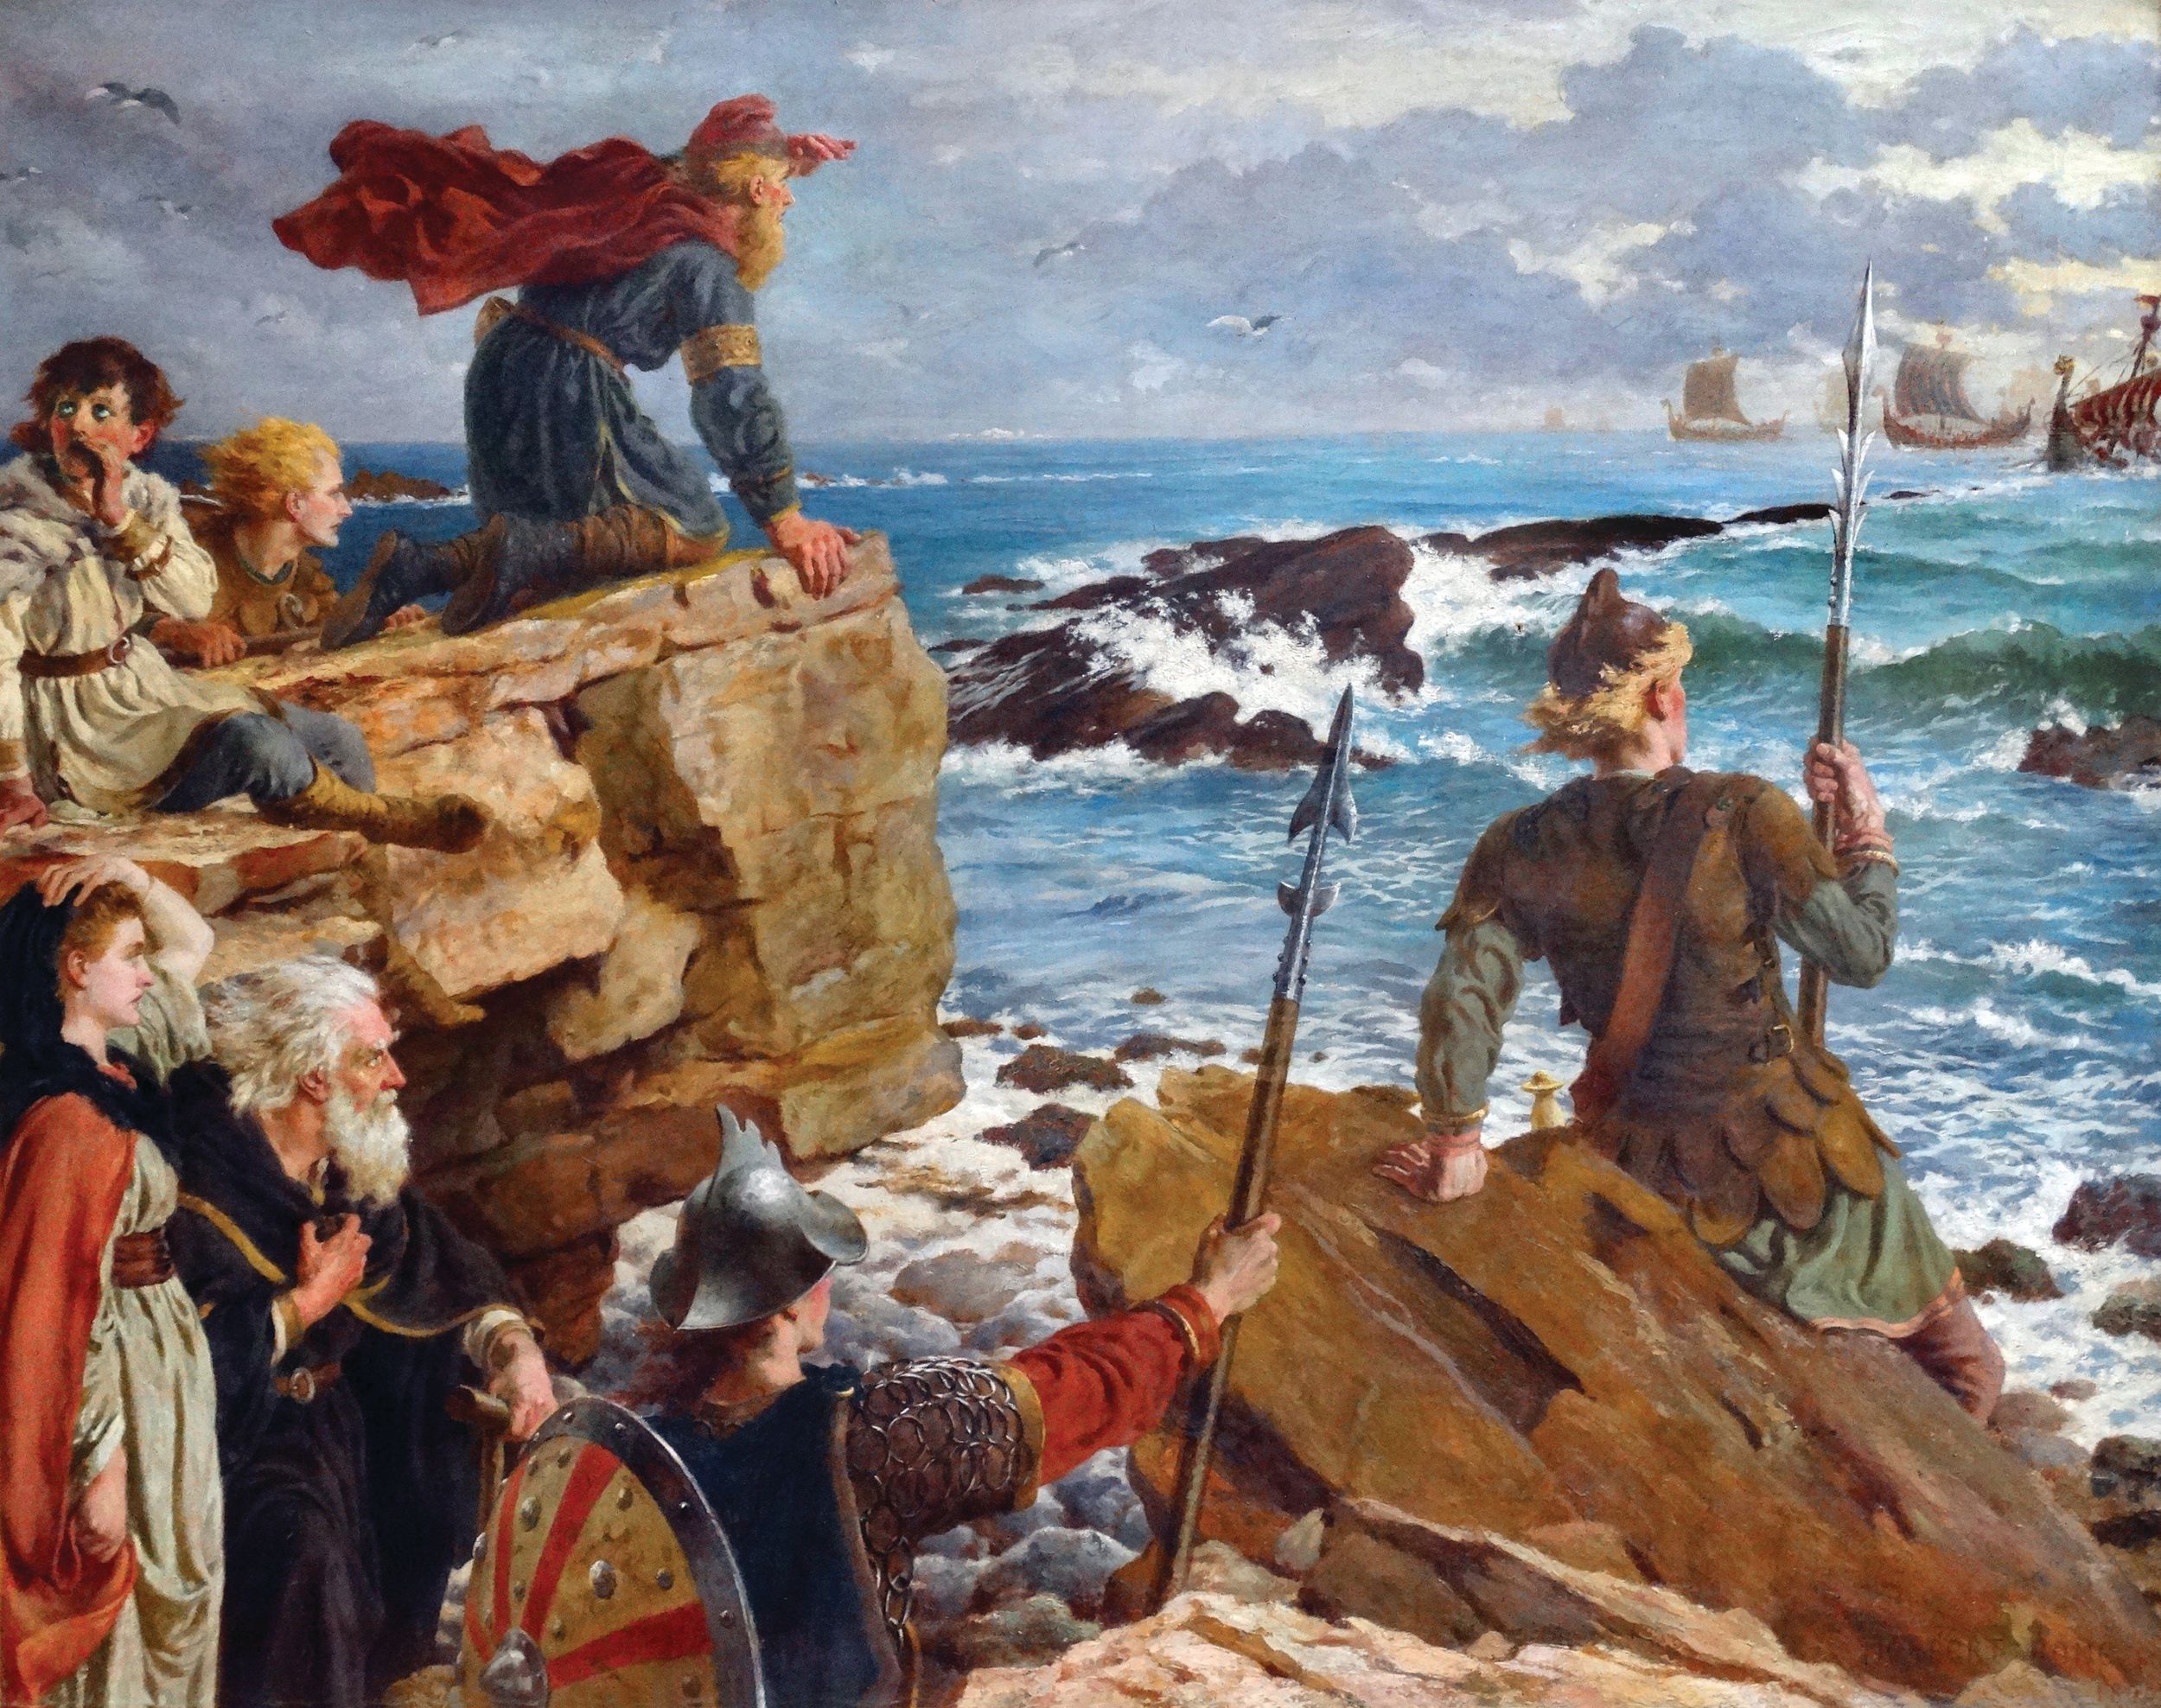 Alfred the Great’s Anglo-Saxons watch Viking ships approach the shores of England in the painting “How the Danes Came up the Channel a Thousand Years Ago: Off Peveril Ridge, Swanage, AD 877,” by Herbert Arthur Bone (1853–1931).